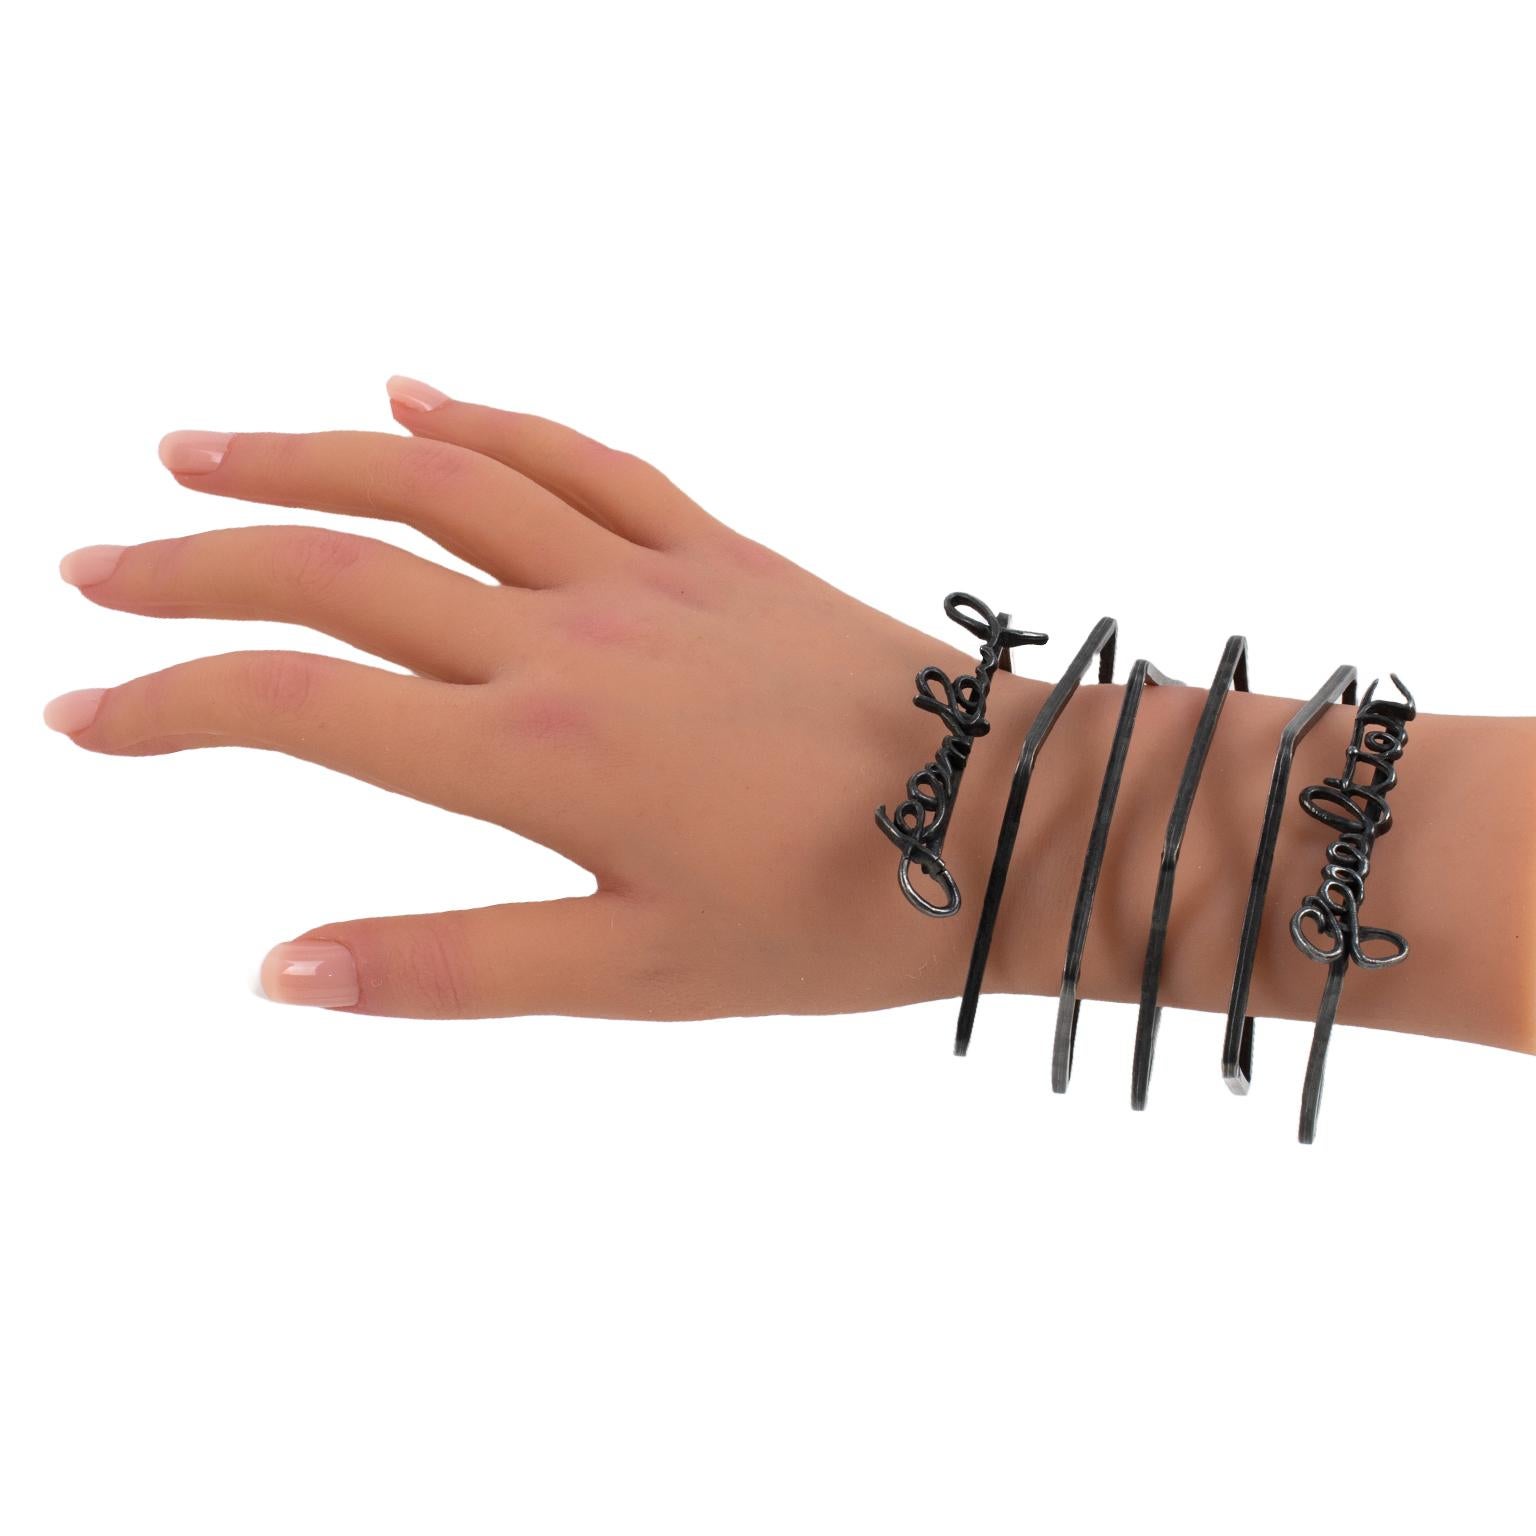 This impressive Jean Paul Gaultier Paris oversized metal cuff bracelet is from the Spring 2013 ready-to-wear runway collection. This bangle is documented. Check the last picture for reference. The piece features a blackened metal square coiled wide